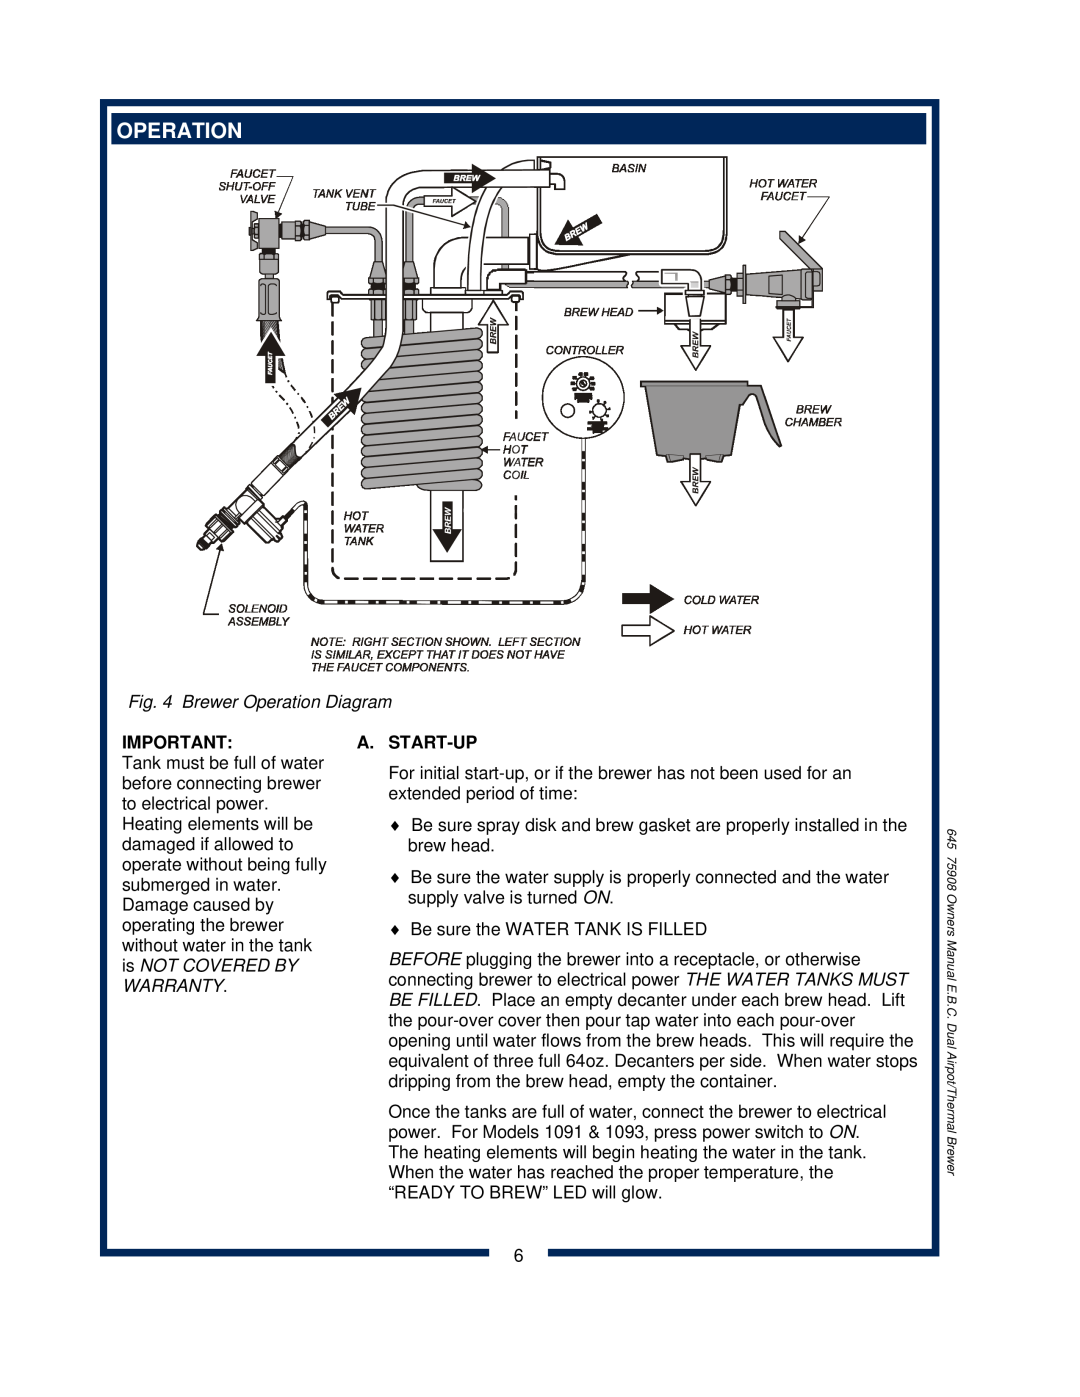 Bloomfield 1091, 1092, 1090, 1093 owner manual Brewer Operation Diagram, A.Start-Up 